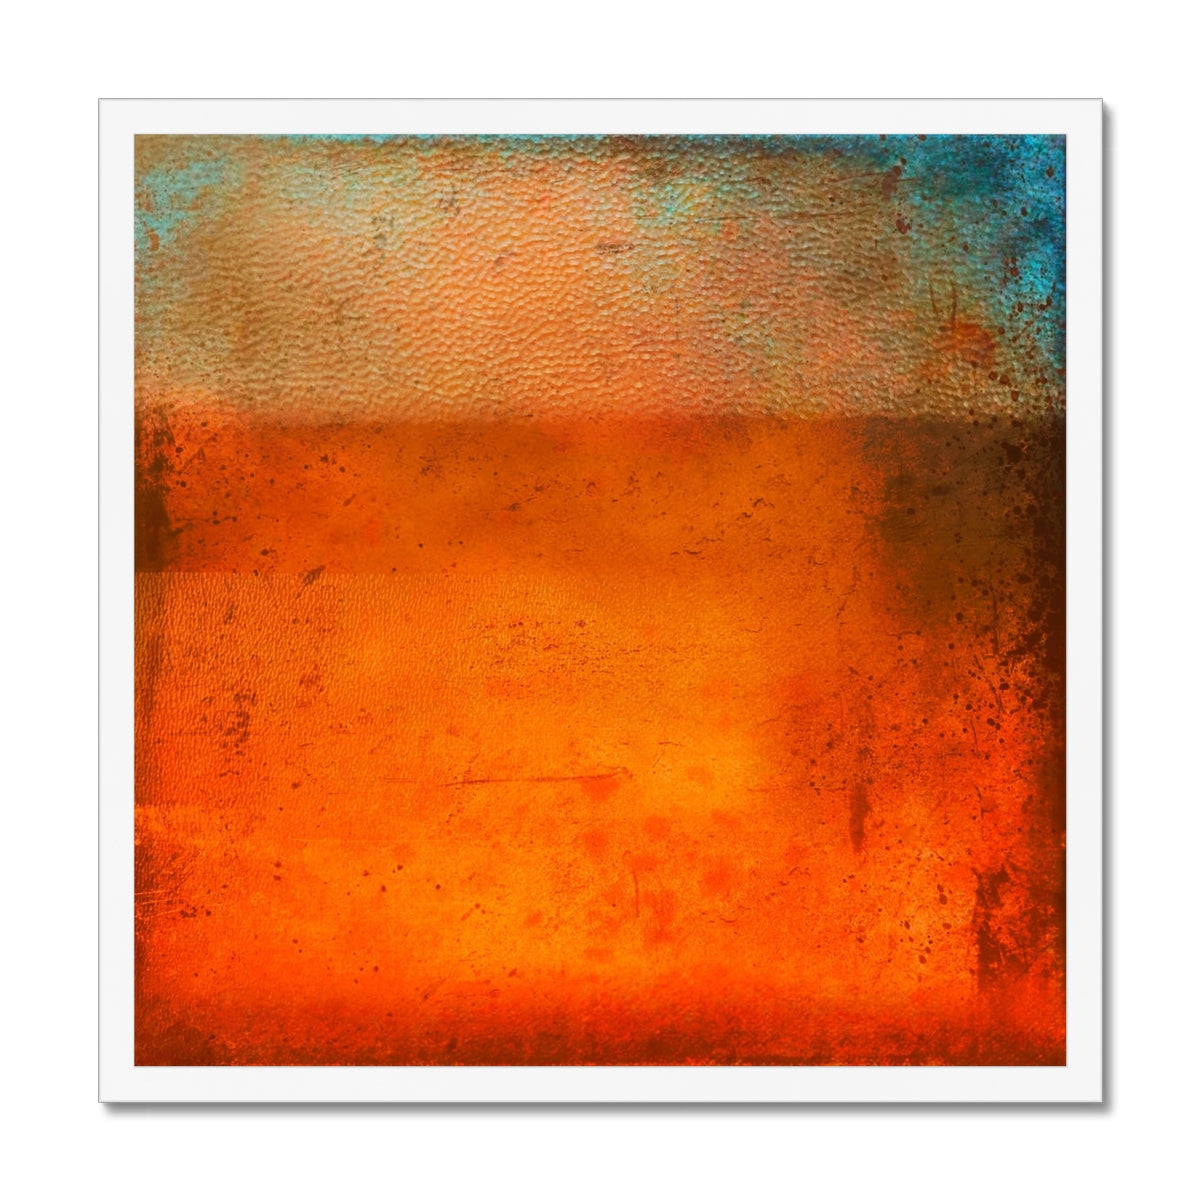 Sunset Horizon Abstract Painting | Framed Prints From Scotland-Framed Prints-Abstract & Impressionistic Art Gallery-20"x20"-White Frame-Paintings, Prints, Homeware, Art Gifts From Scotland By Scottish Artist Kevin Hunter